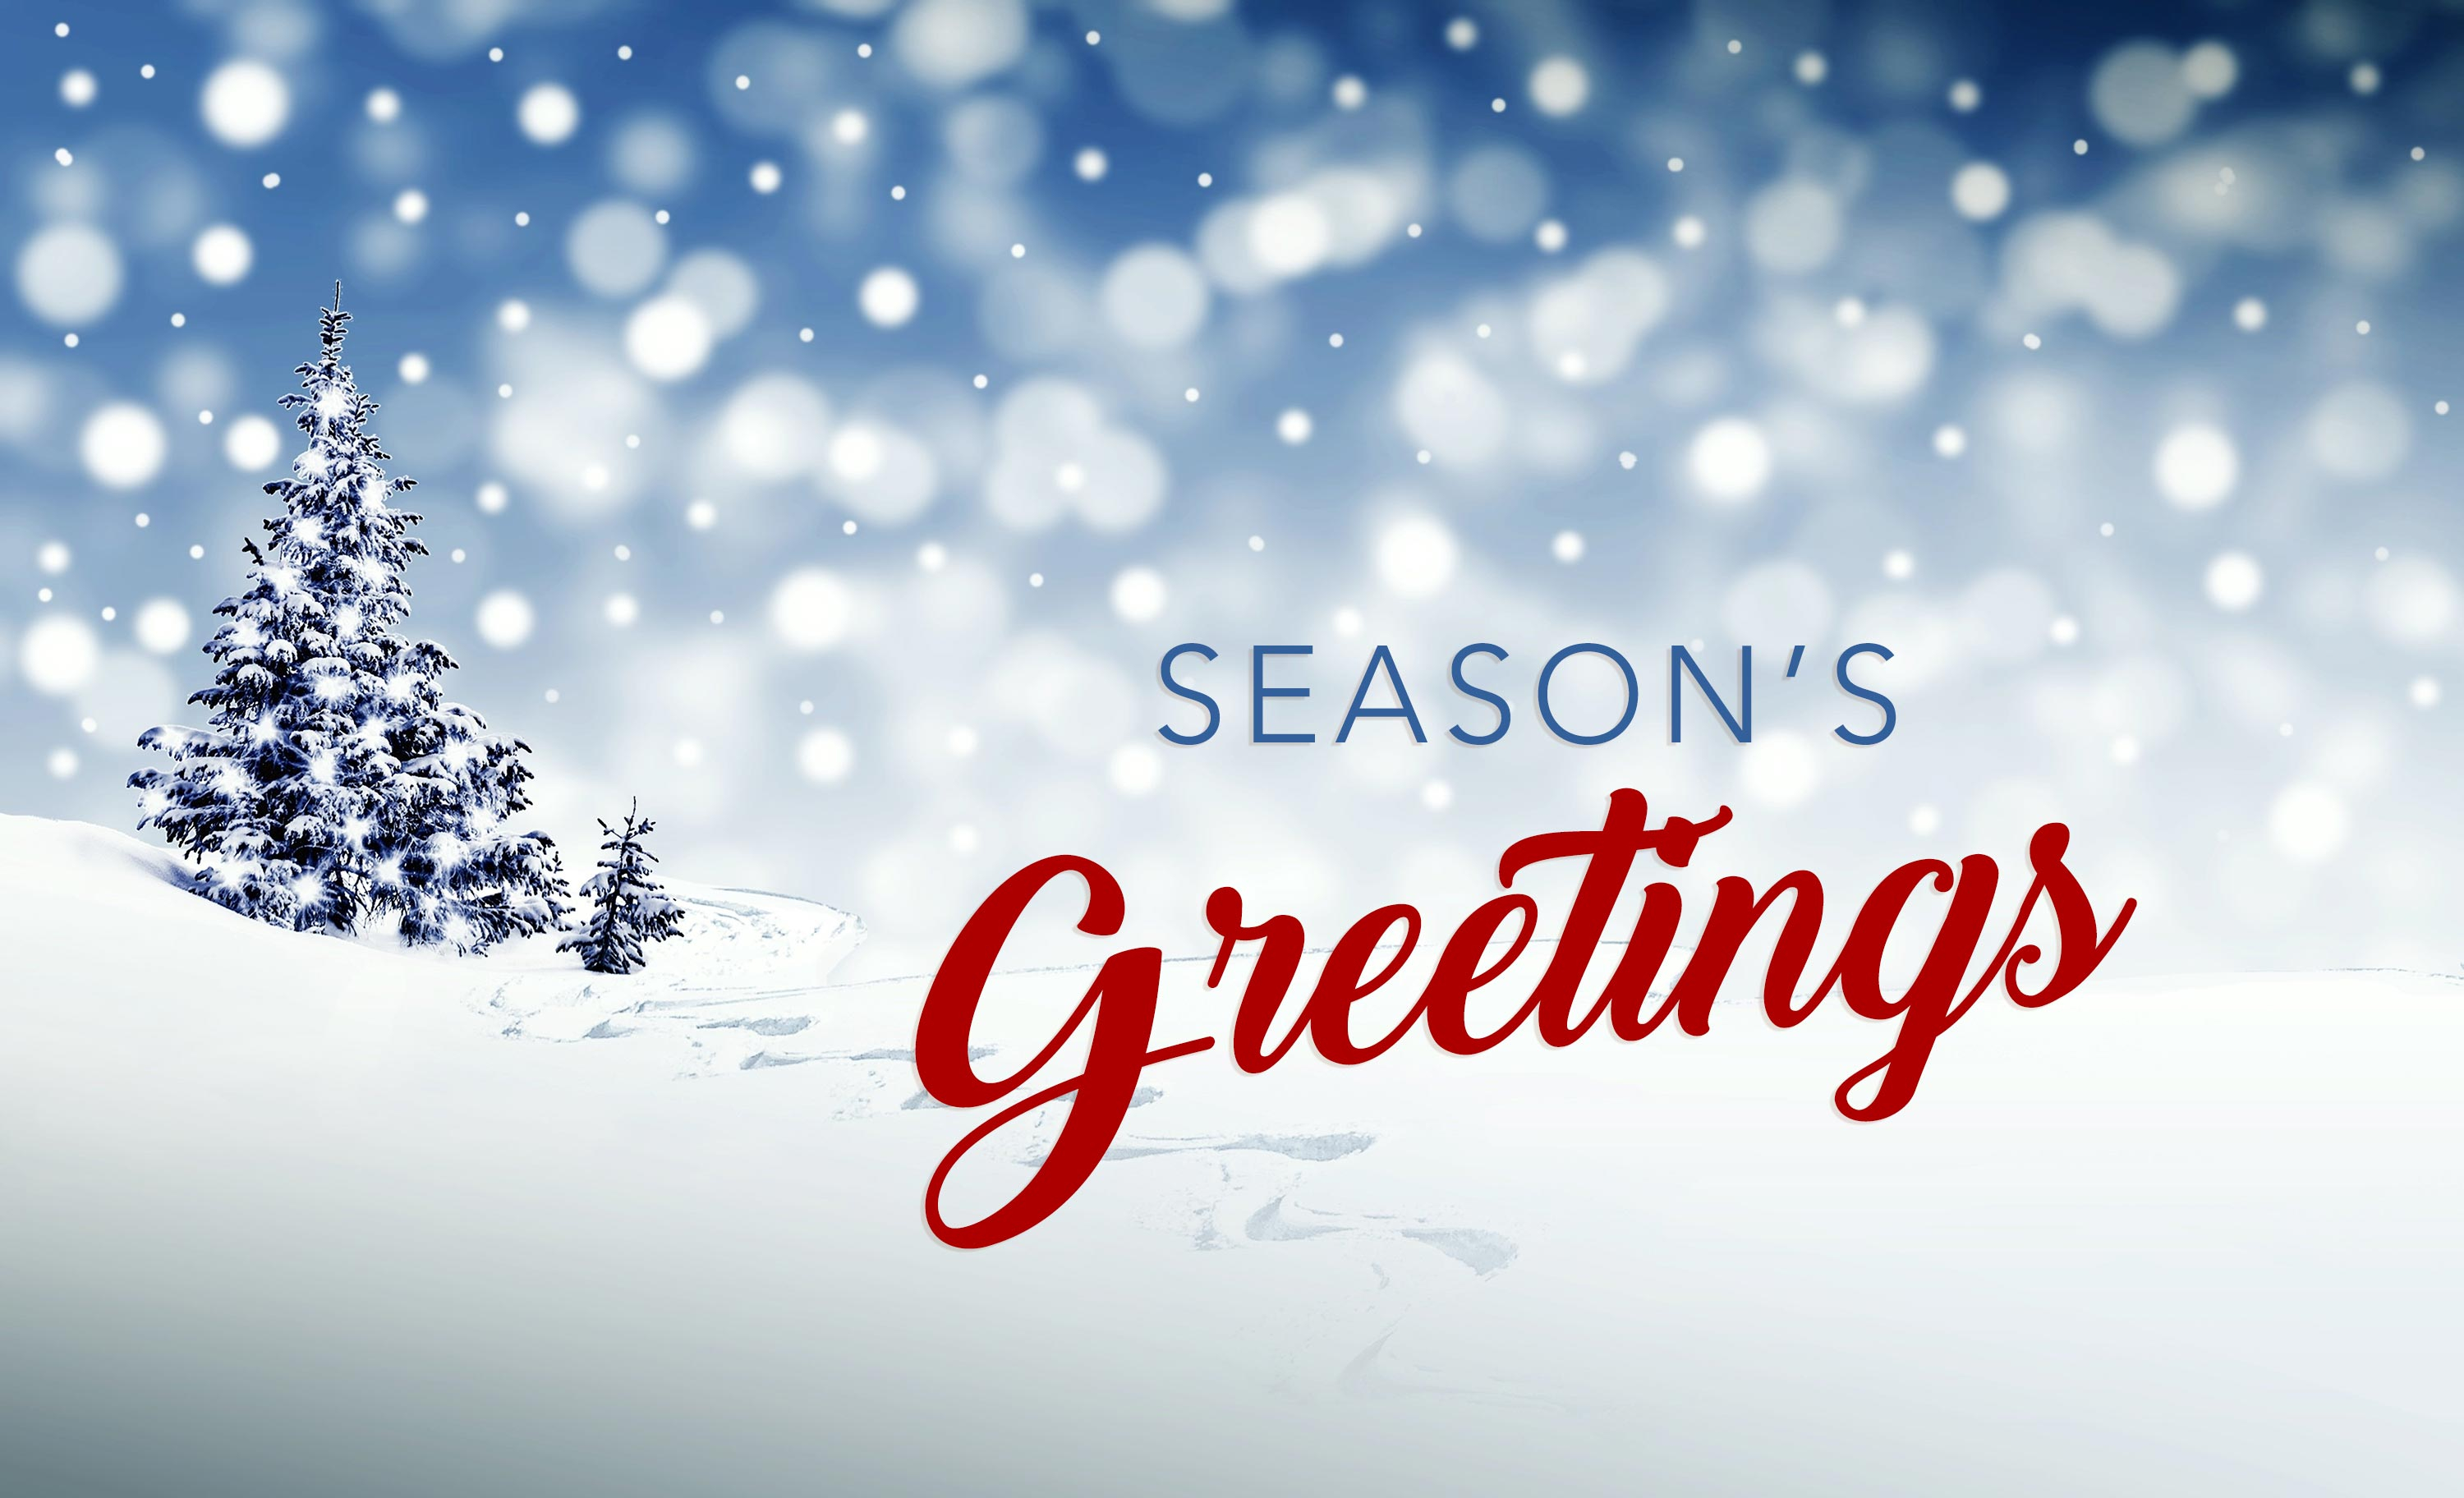 3000x1824 Free download Free download 15 Seasons Greetings Cards Stock Images HD [] for your Desktop, Mobile \u0026 Tablet | Explore 39+ Winter 2020 Hd Wallpapers | Winter 2020 Hd Wallpapers, 2020 Winter Wallpapers, Winter 2020 Wallpapers